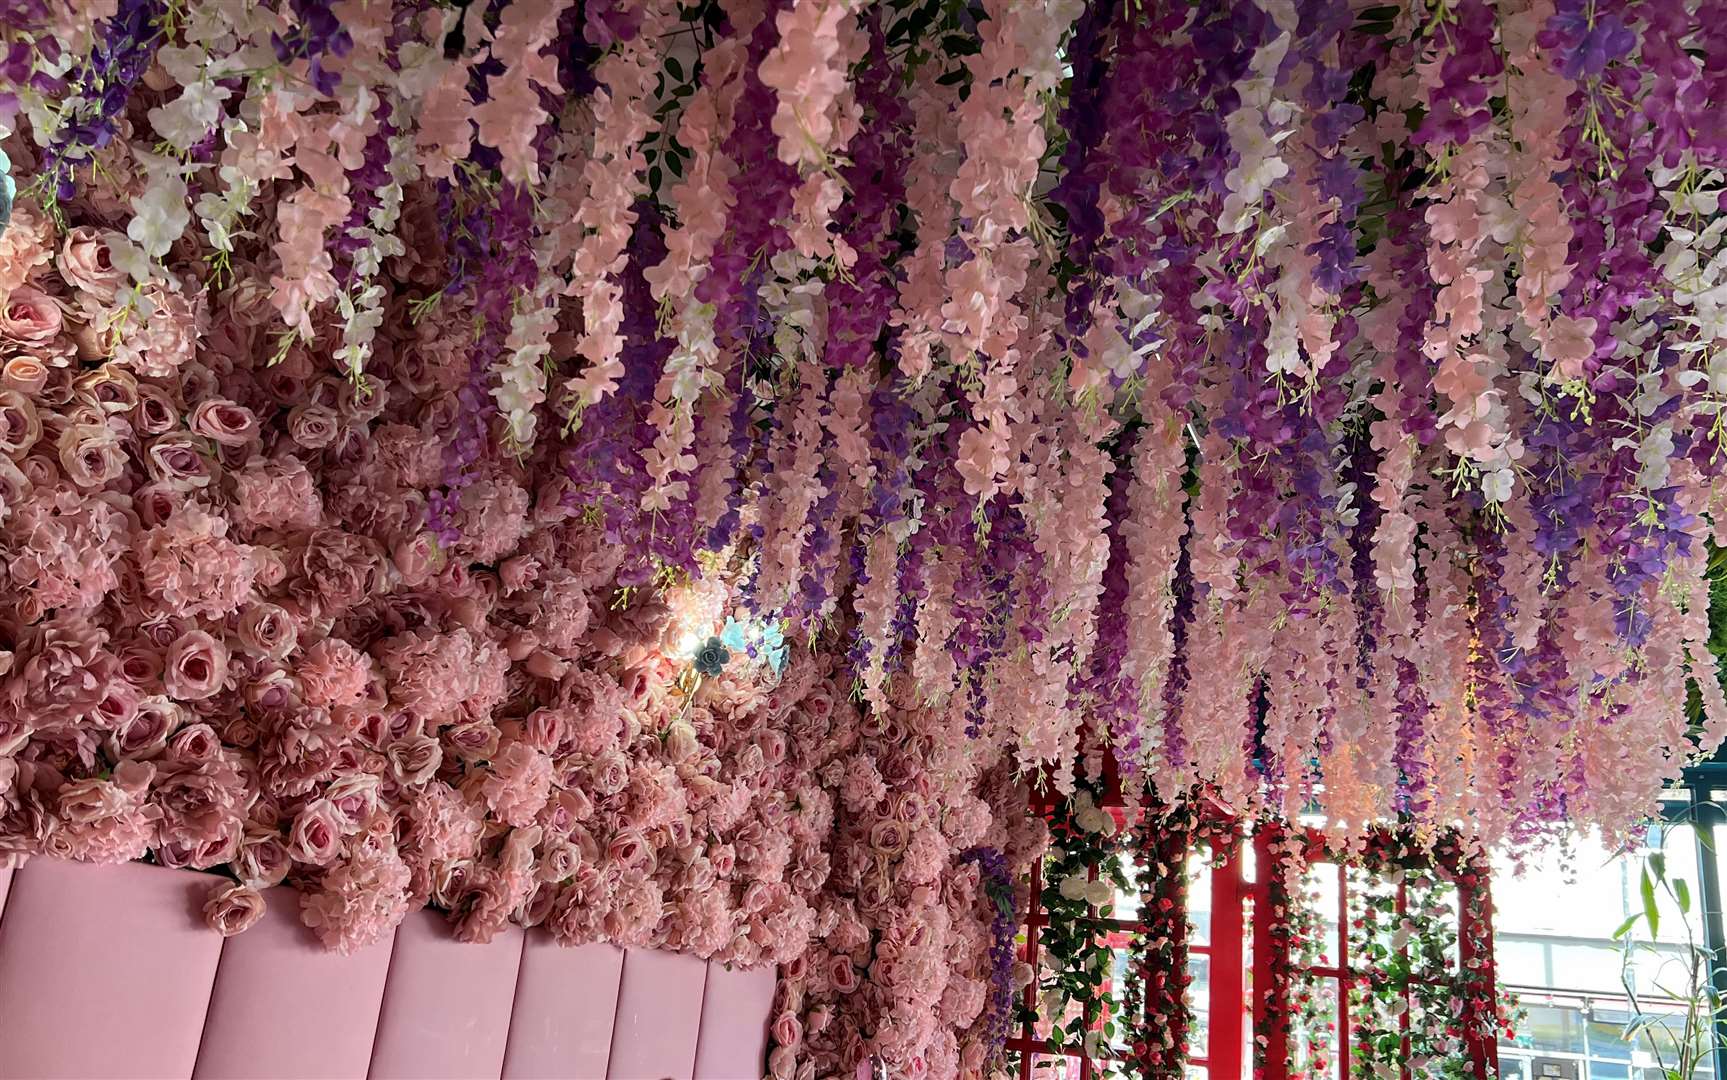 If you like fake wisteria, boy are you in luck